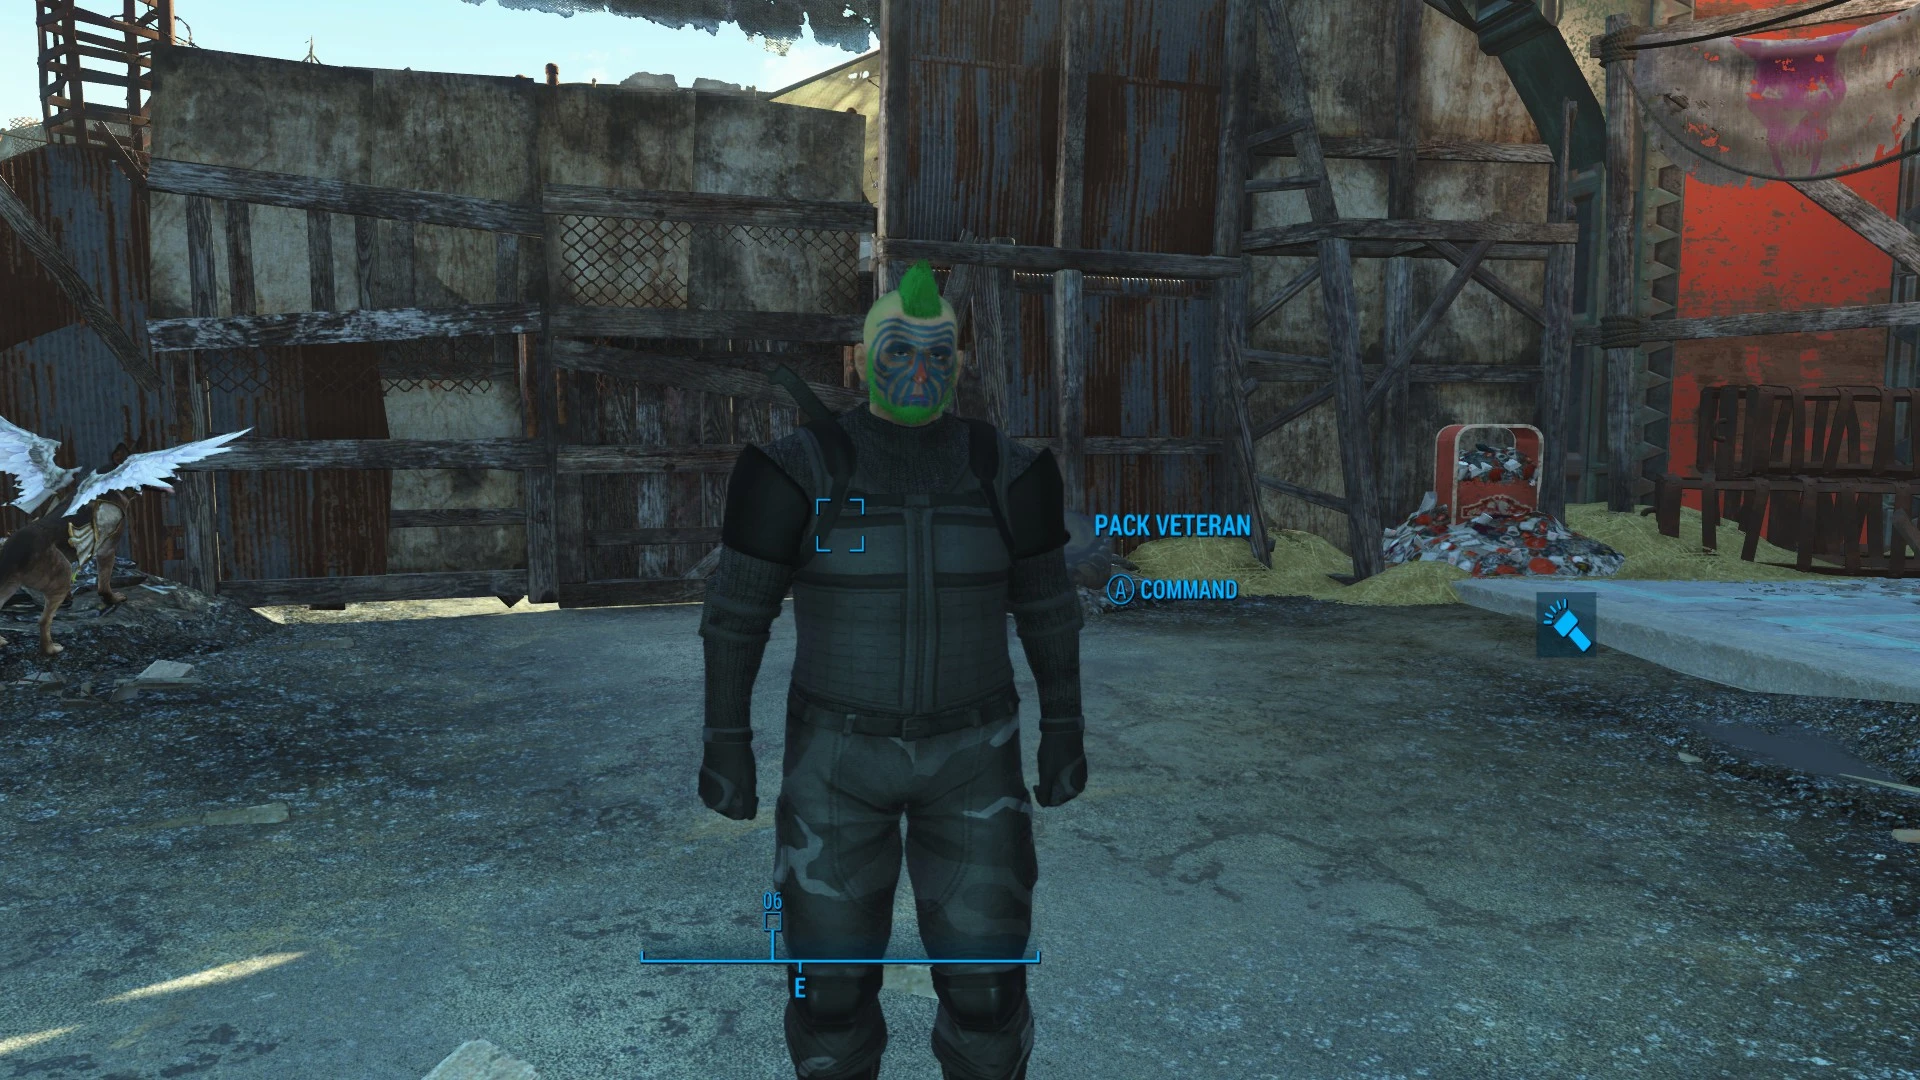 black ops armor fallout 4